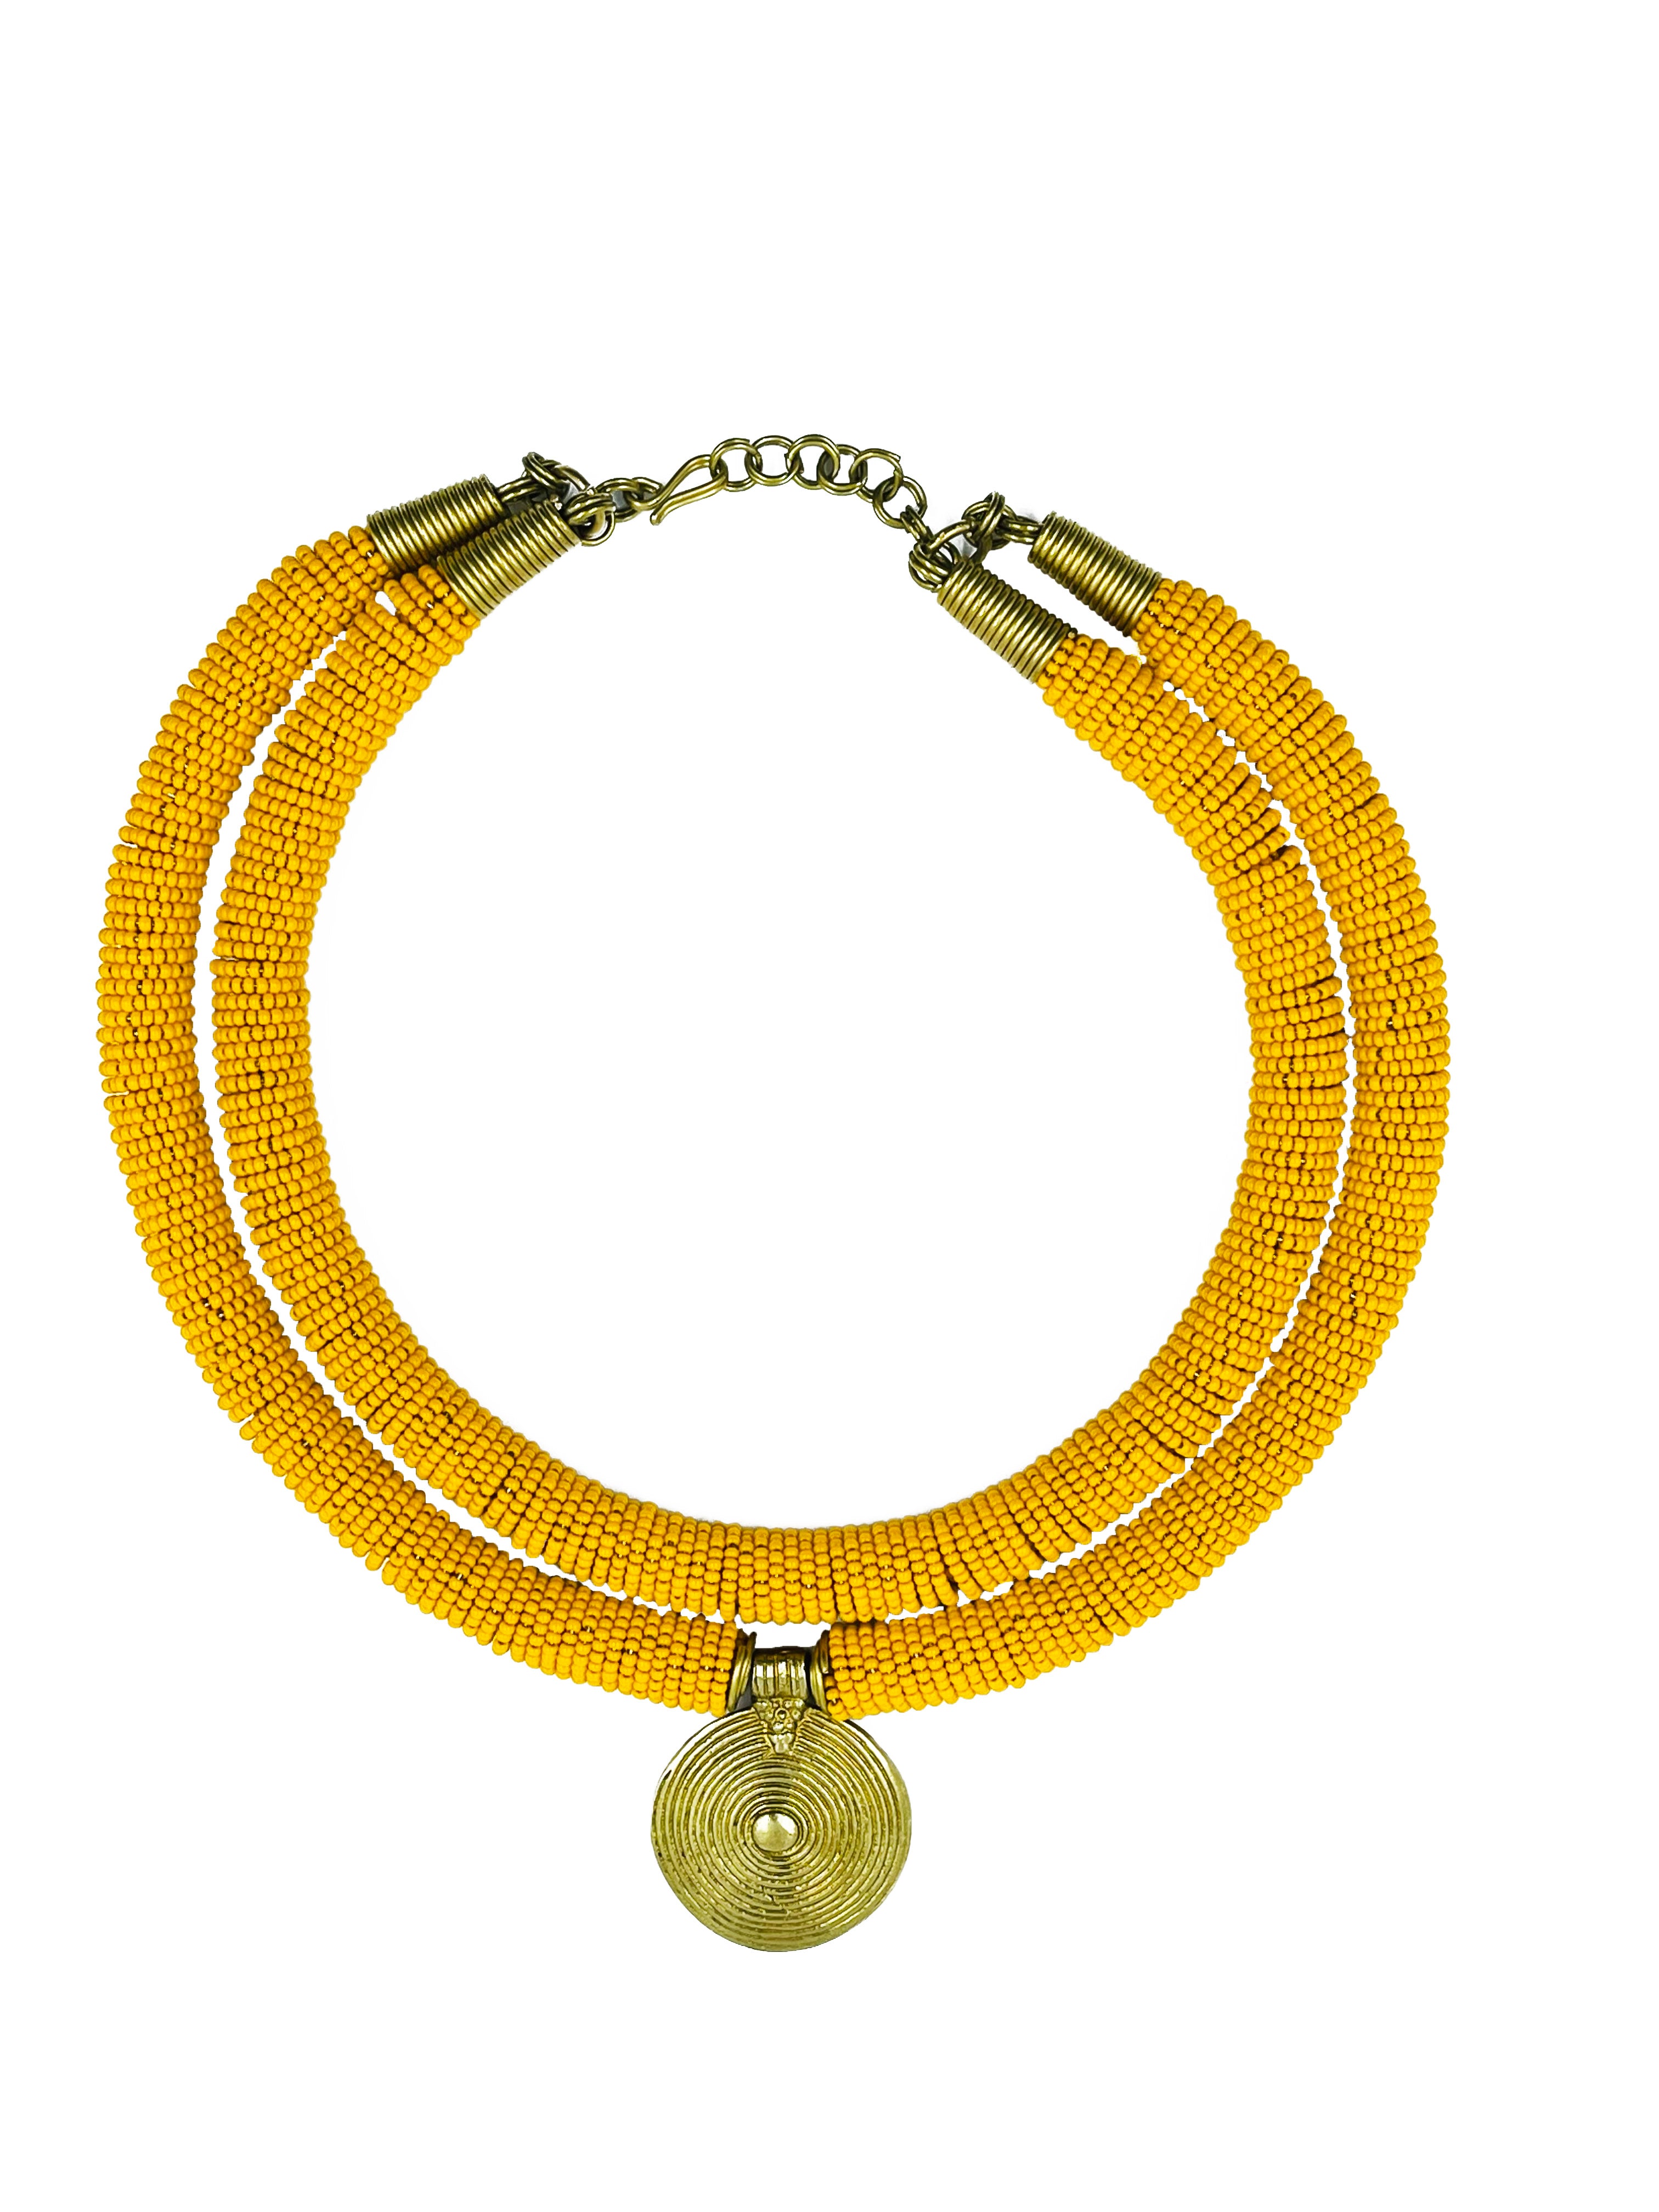 Aje is a stunning necklace showcasing African artistry's essence. The necklace features an eight-inch strand of handcrafted glass beads sourced locally in Africa